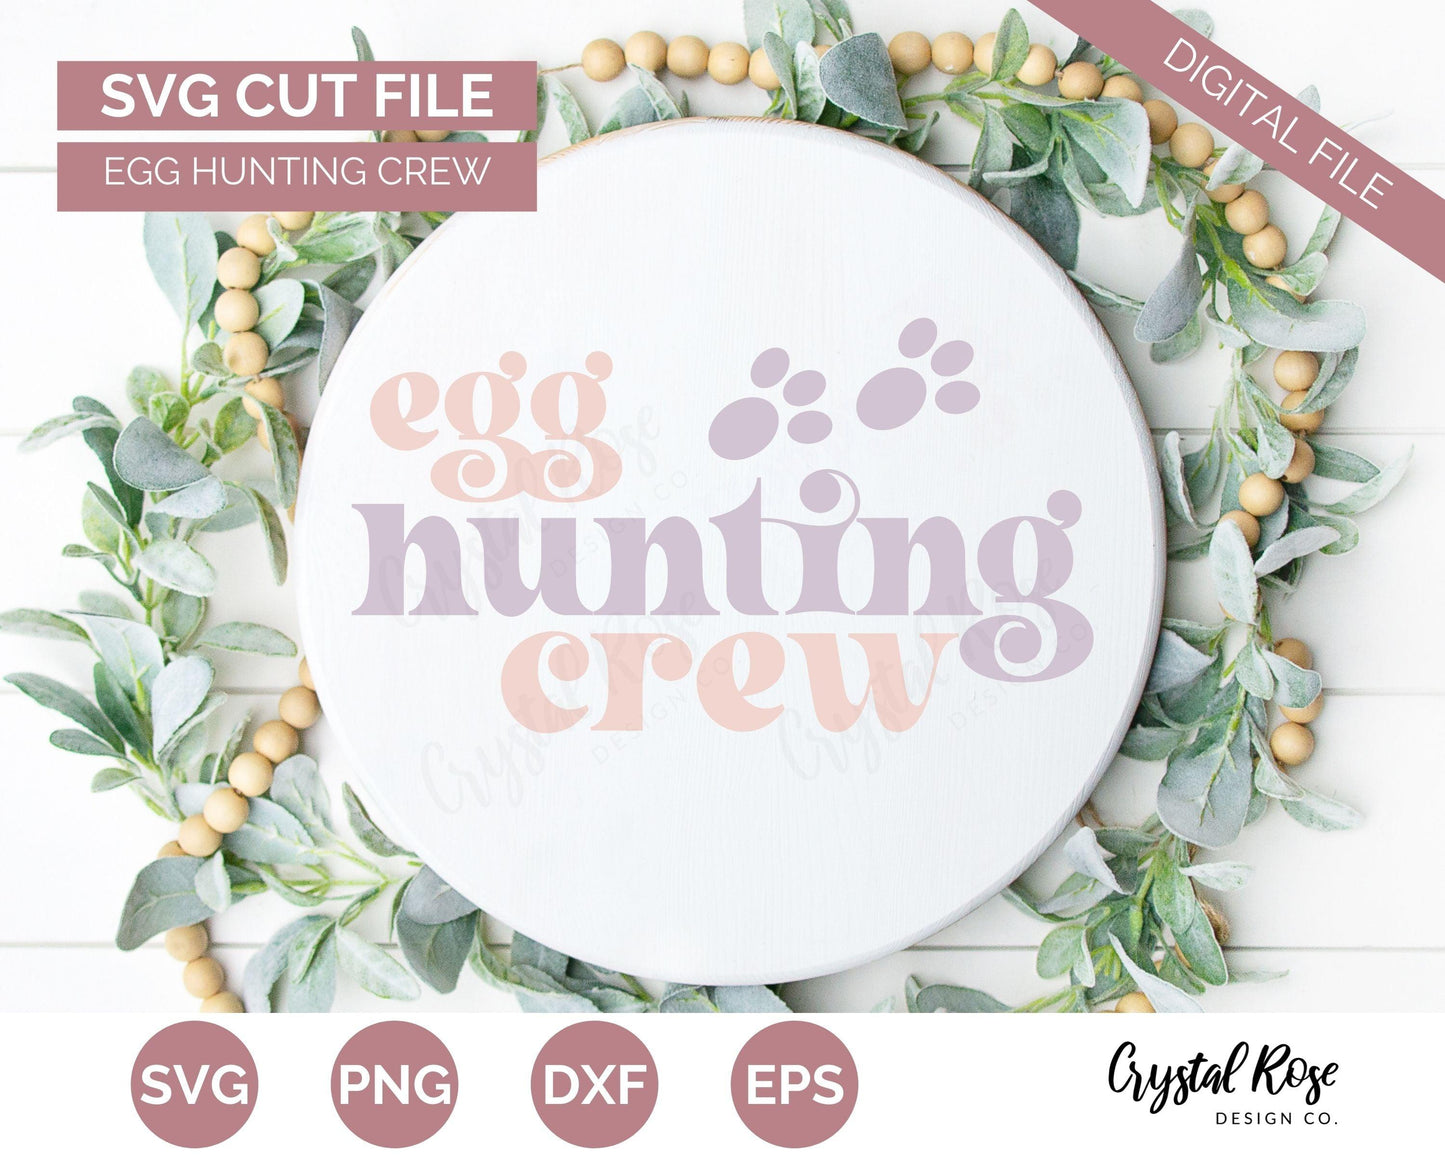 Egg Hunting Crew SVG, Easter SVG, Digital Download, Cricut, Silhouette, Glowforge (includes svg/png/dxf/eps)